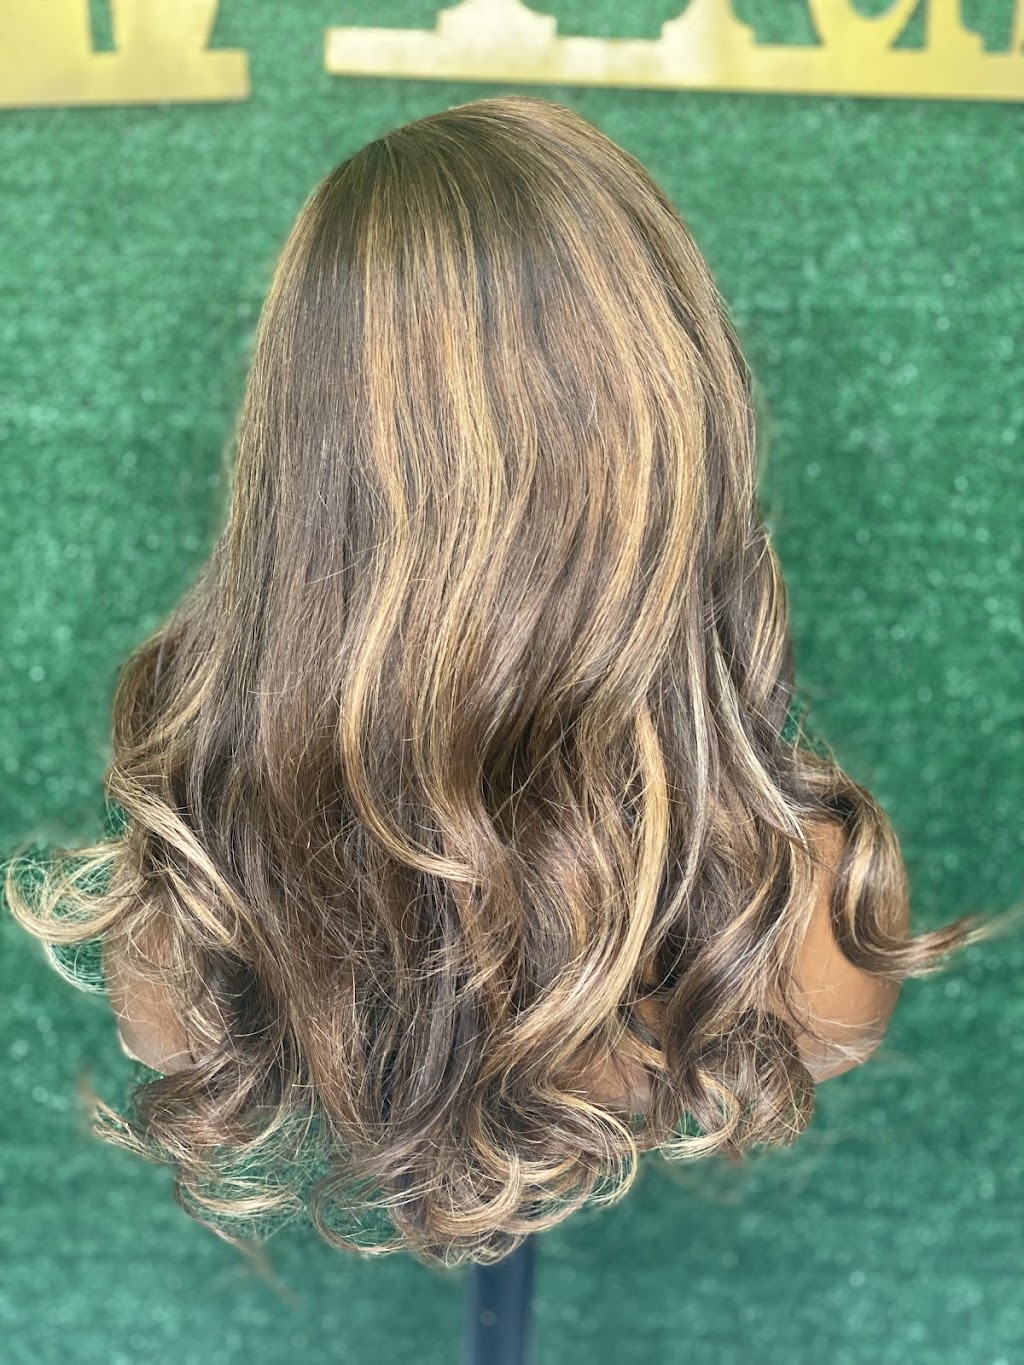 CP Wigs & Beauty | 13960 Farm to Market 548 #120, Forney, TX 75126, USA | Phone: (972) 632-3555